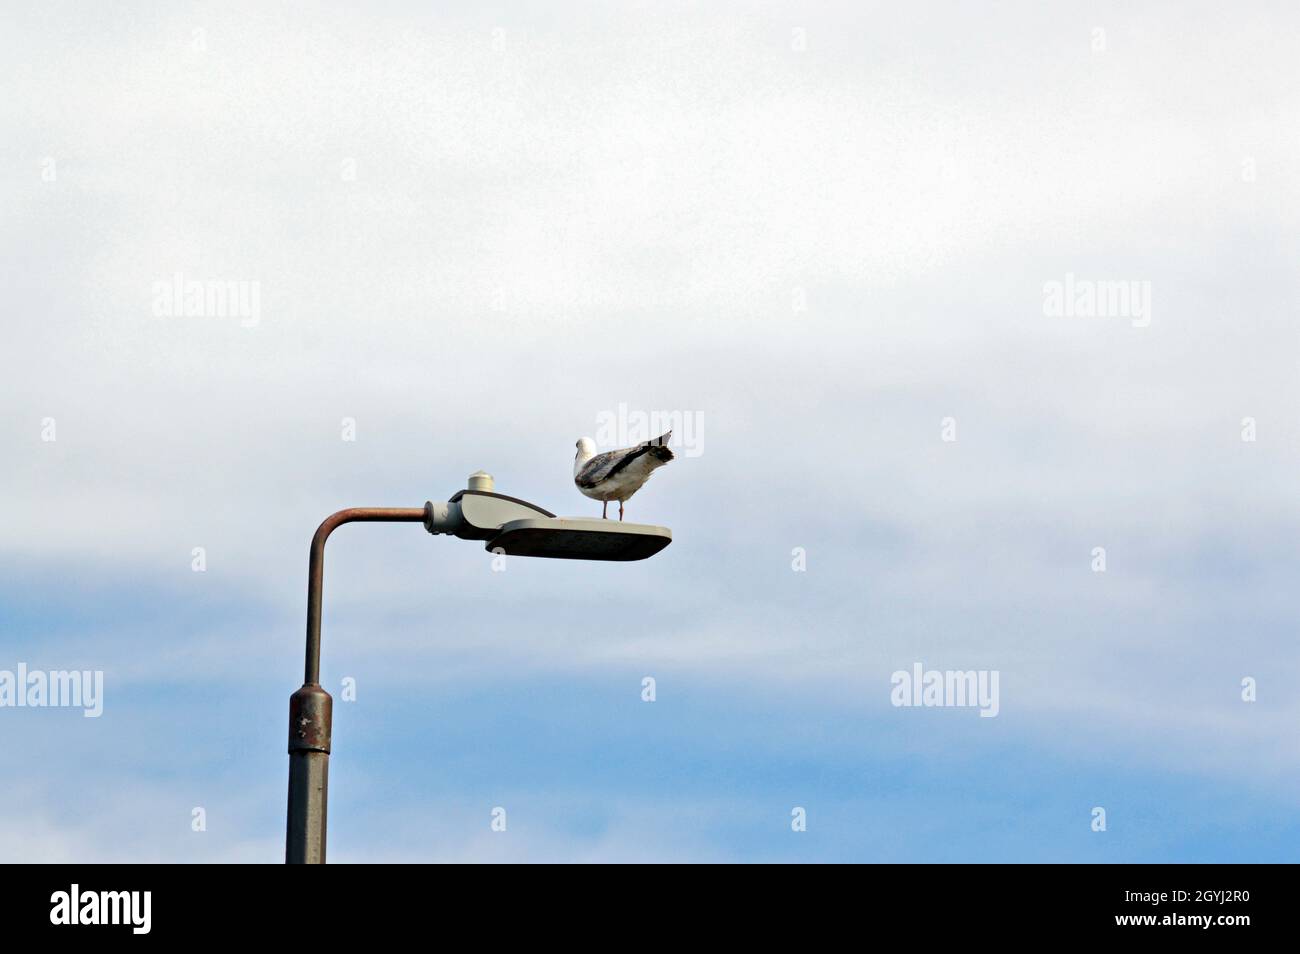 COLWYN BAY. CONWY COUNTY. WALES. 06-19-21. Rhos on Sea, a gull seated on a lamp post on the promenade. Stock Photo